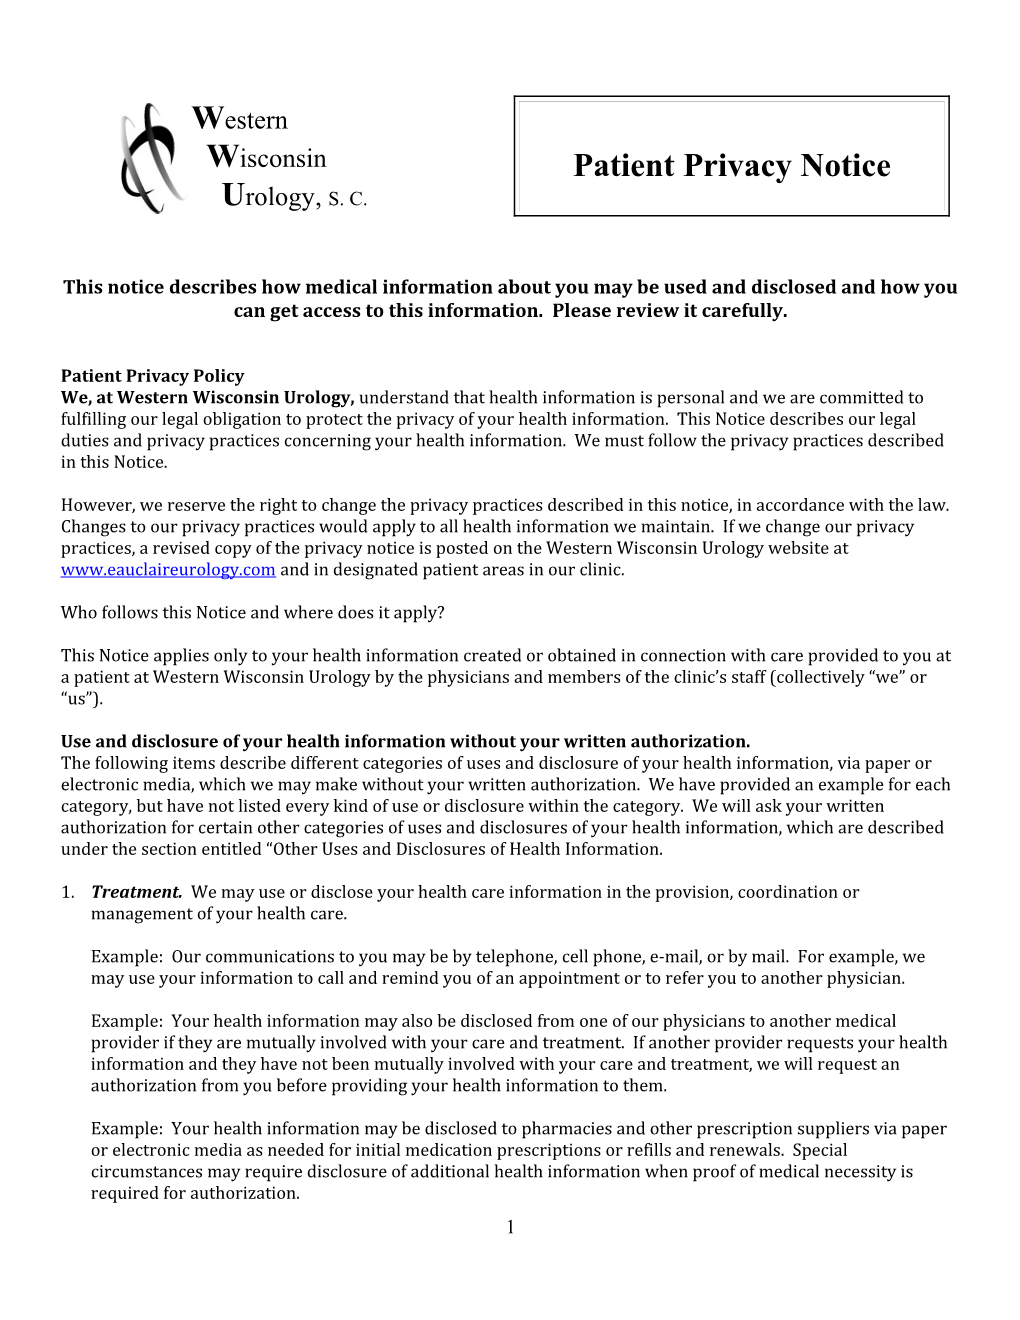 Notice of Provider Privacy Practices